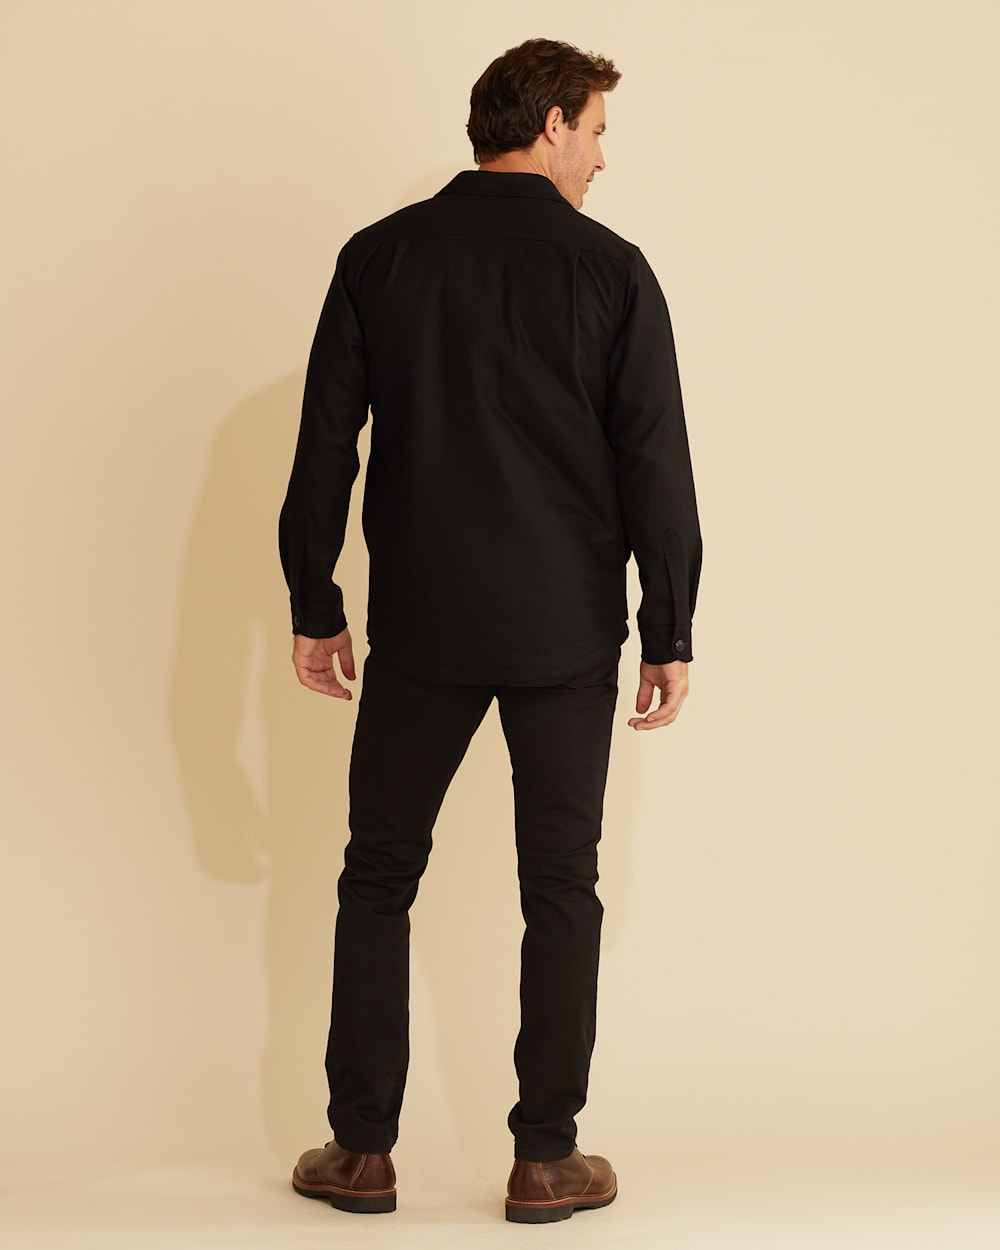 ALTERNATE VIEW OF MEN'S QUILTED SHIRT JACKET IN BLACK image number 3